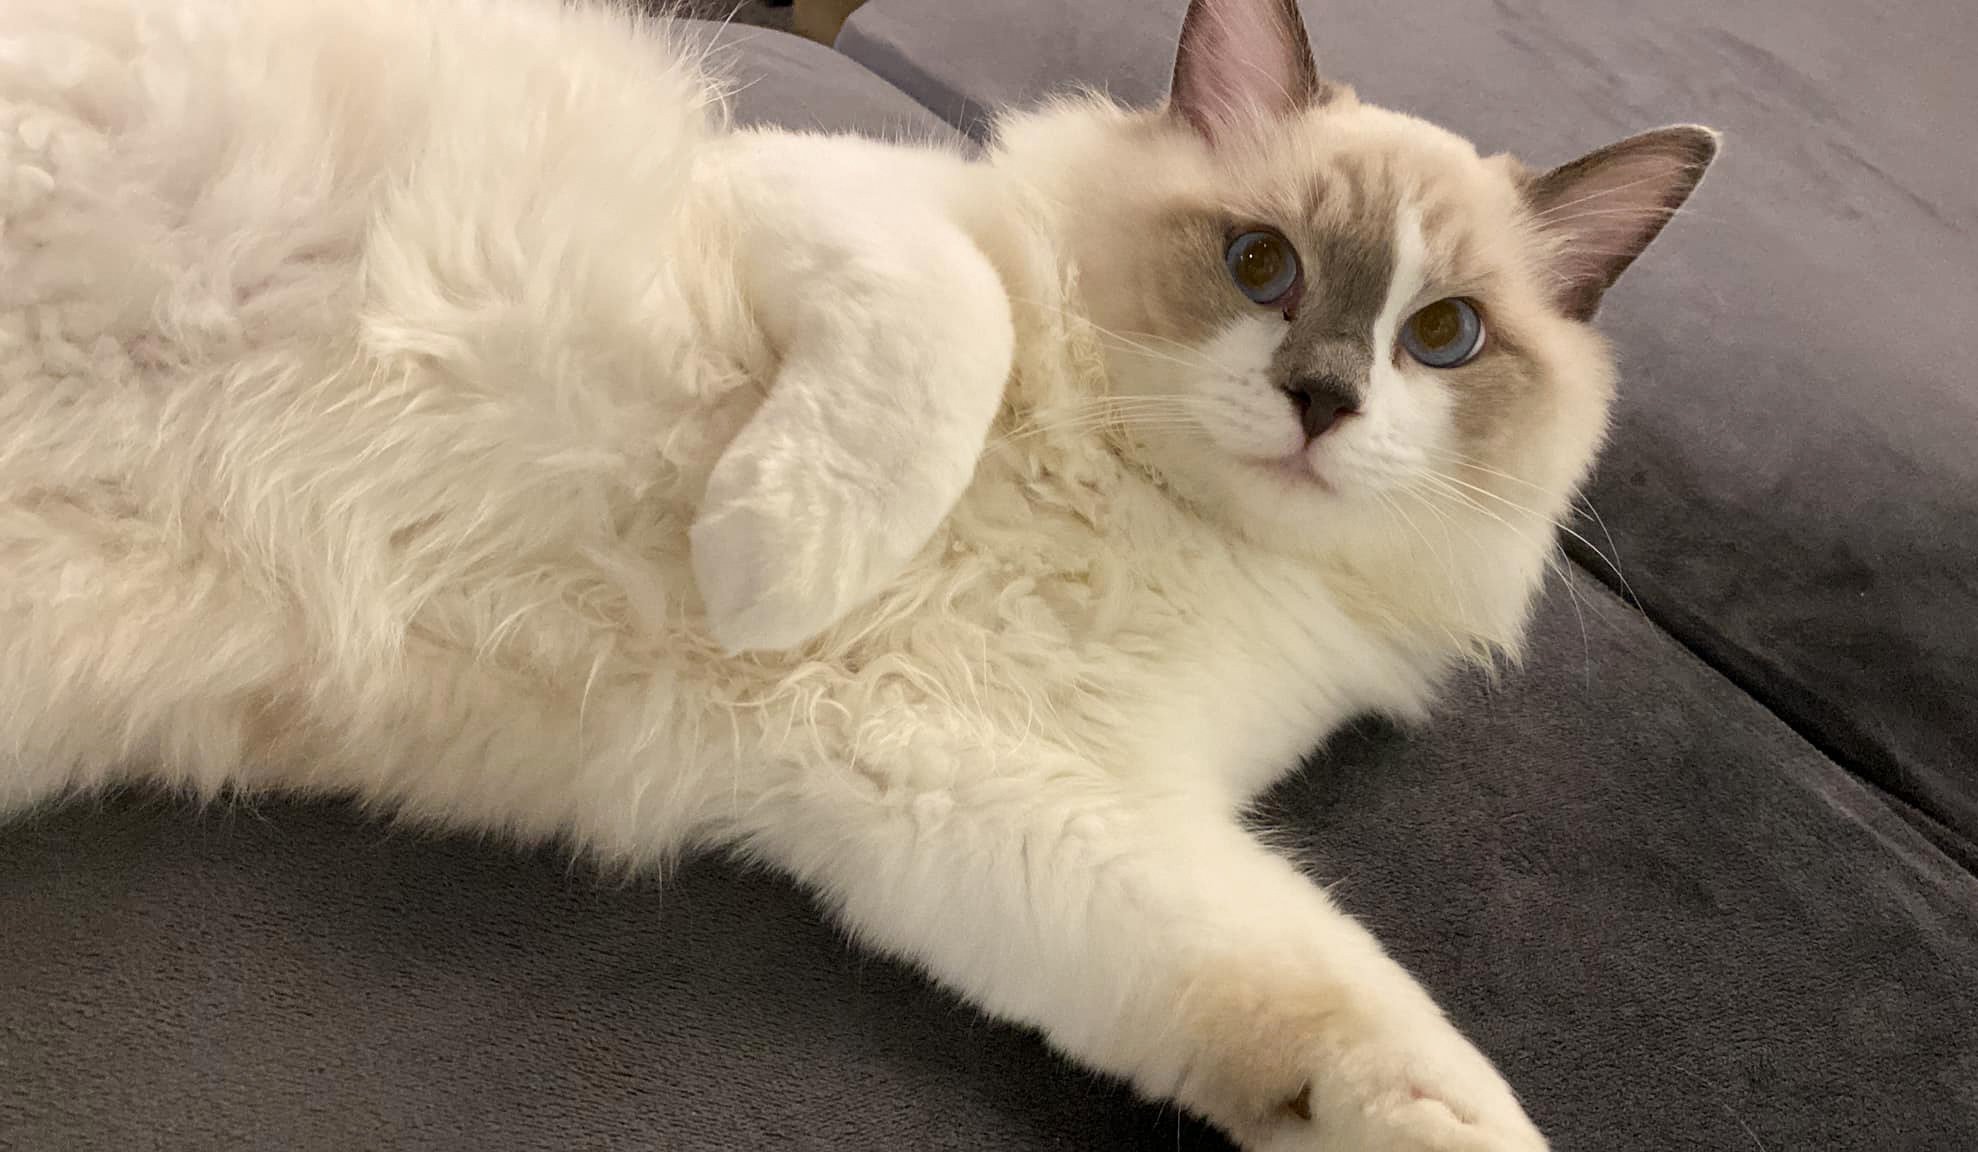 An eight-month-old ragdoll cat was returned safe after it was stolen from a party room in Mong Kok. Photo: Handout